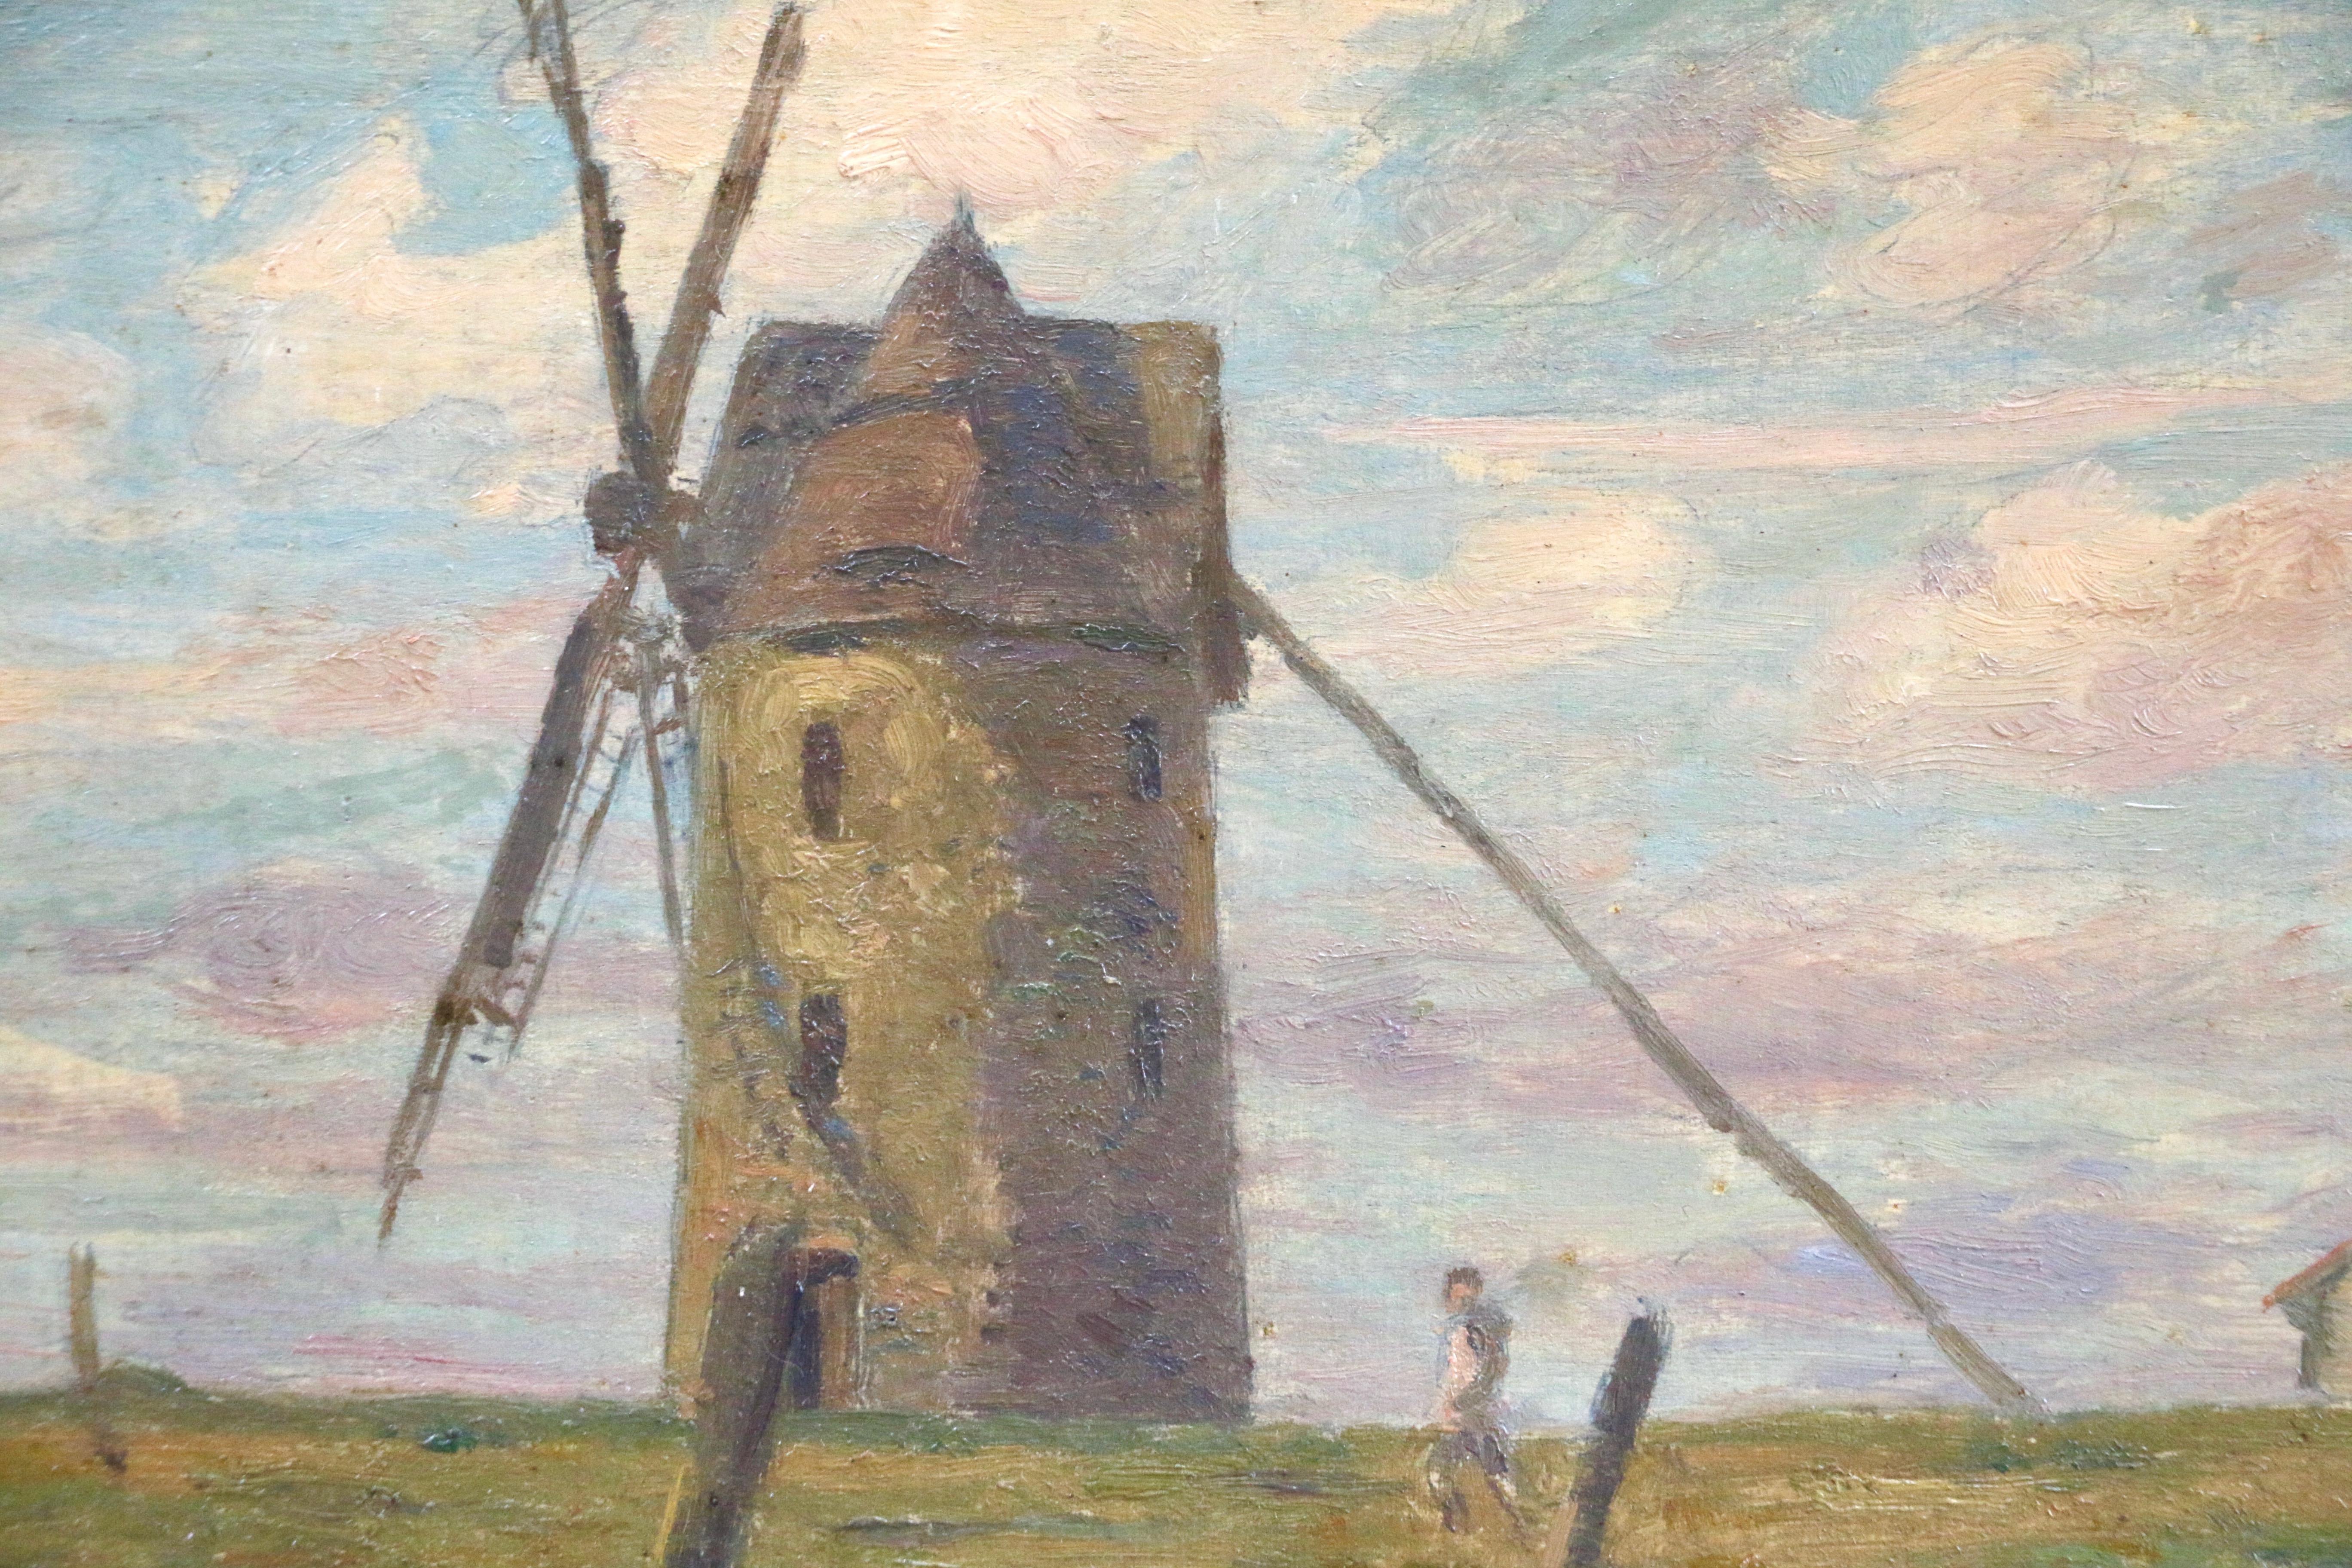 Le Moulin - 19th Century Oil, Figure by Windmill in French Landscape by H Duhem - Painting by Henri Duhem